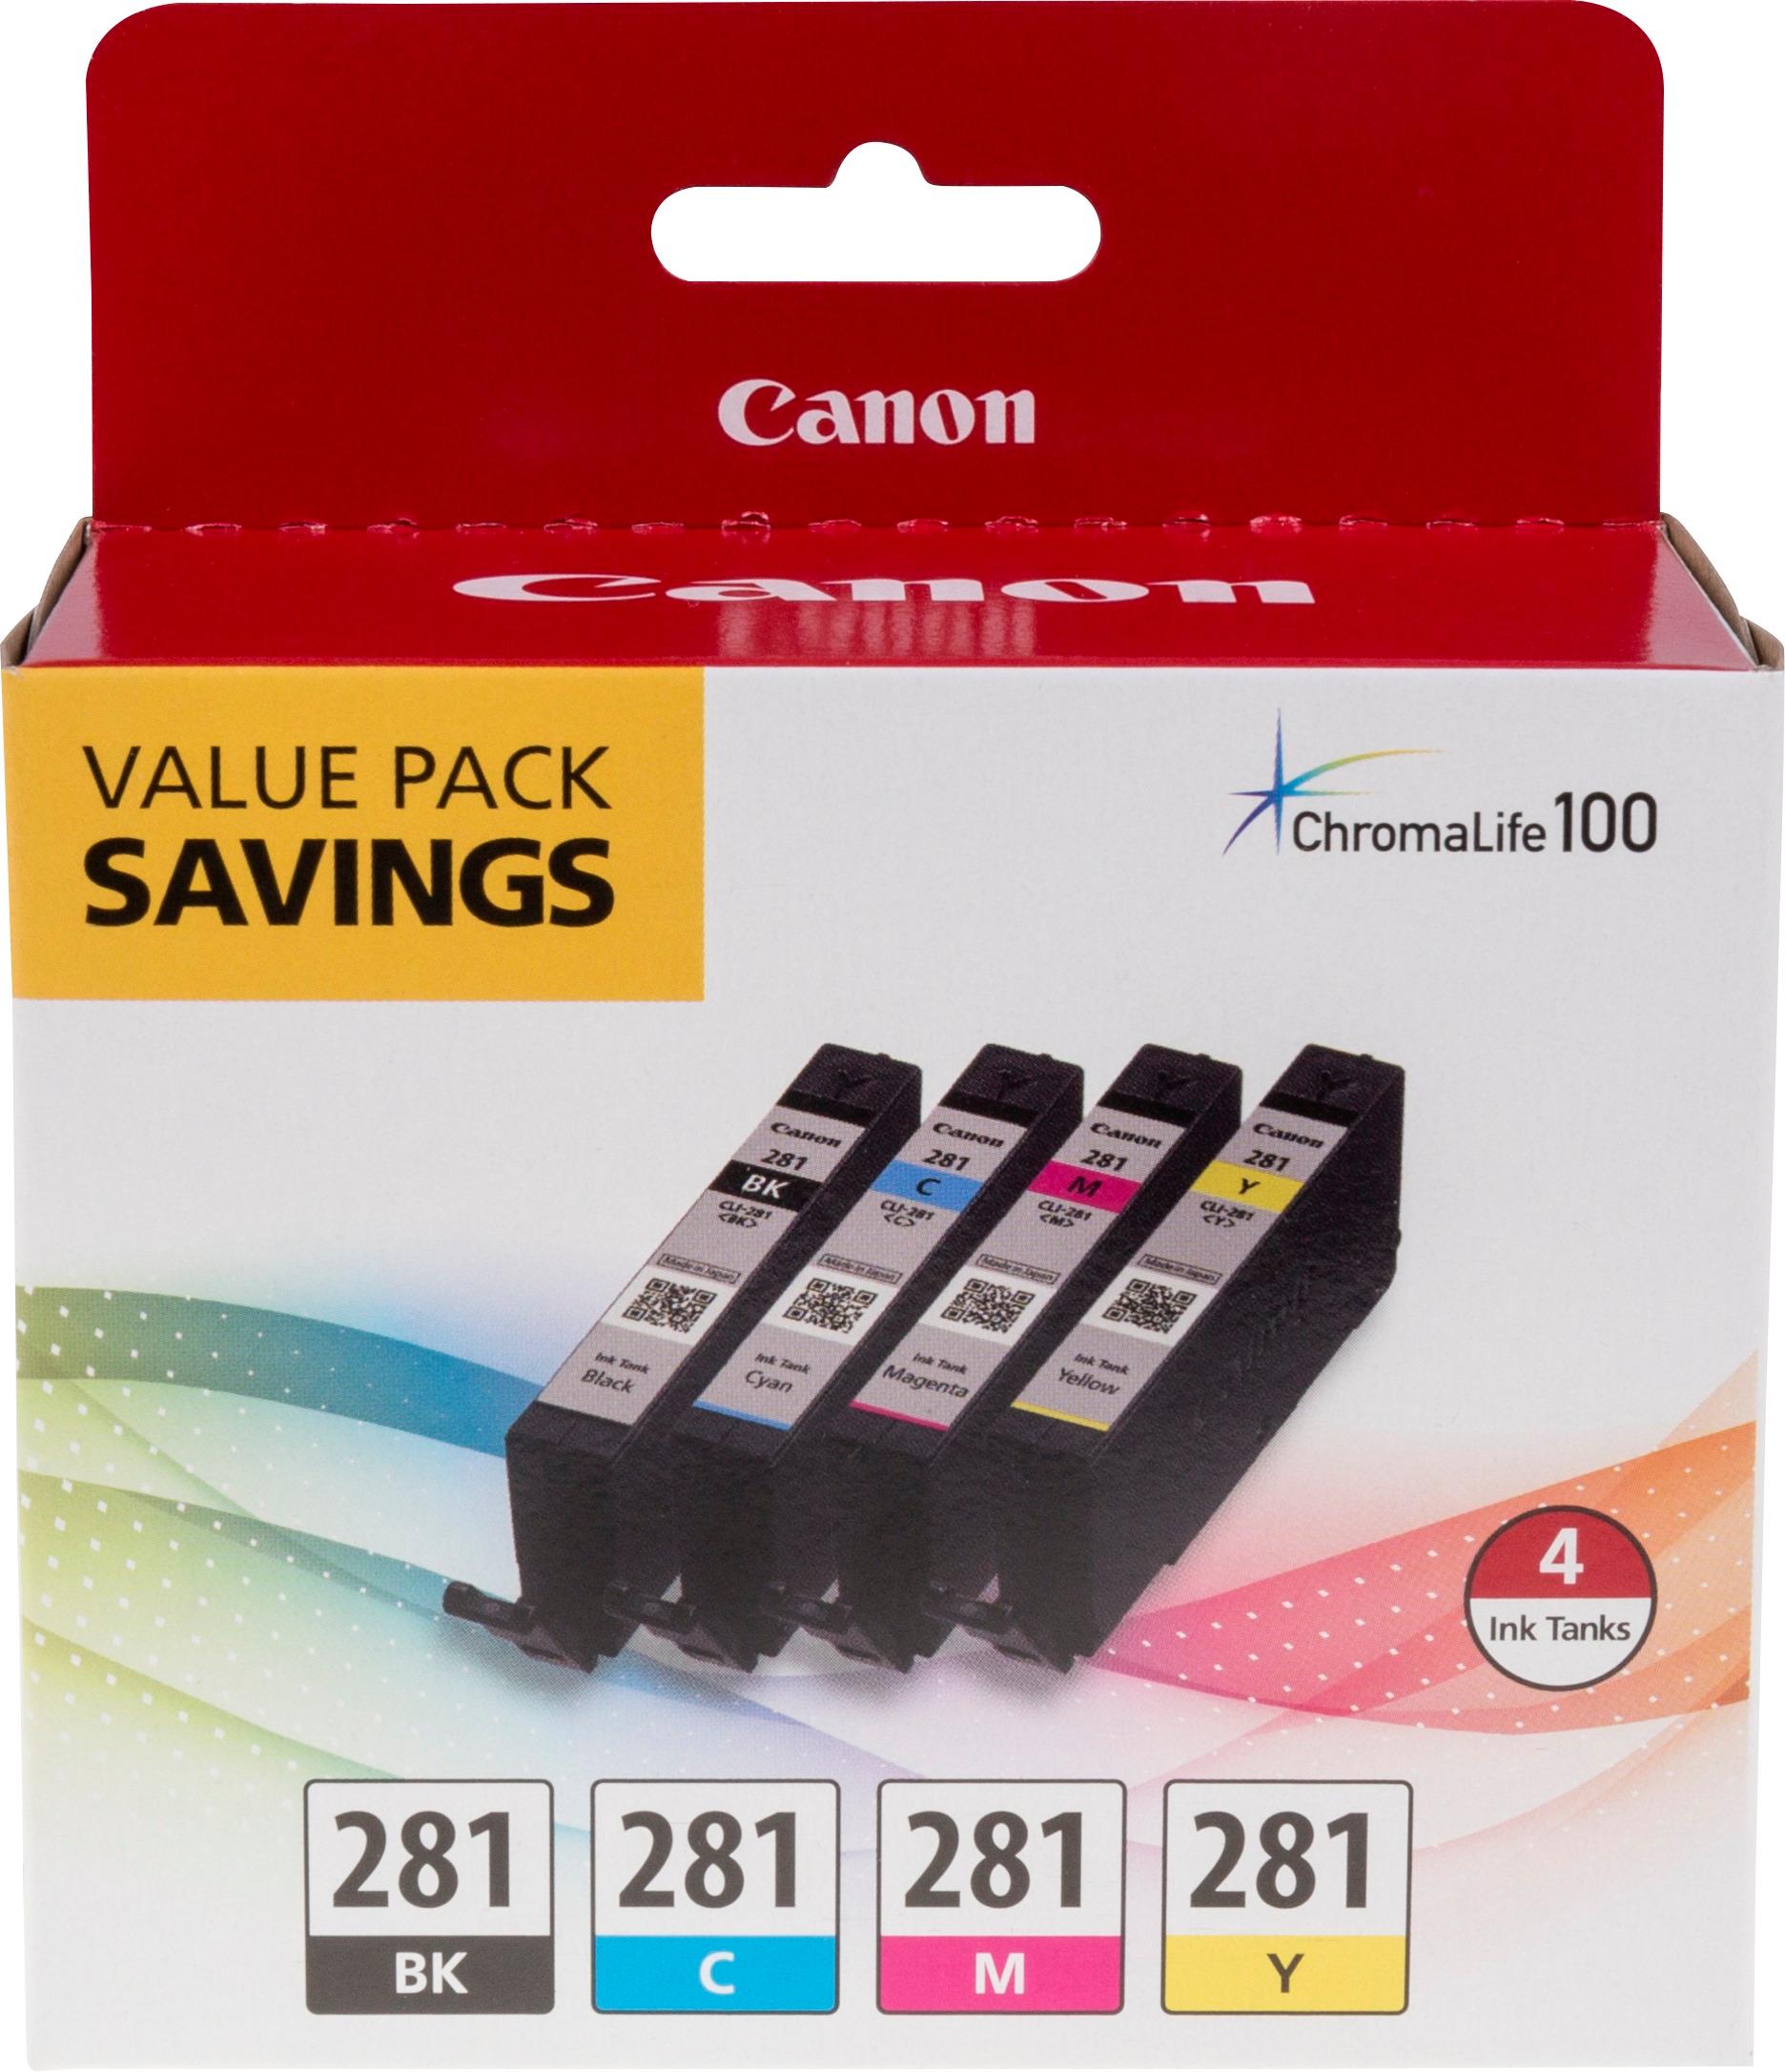 on a holiday syndrome regain Canon CLI-281 4-Pack Standard Capacity Black, Cyan, Magenta, Yellow Ink  Cartridges Black/Cyan/Magenta/Yellow 2091C005 - Best Buy